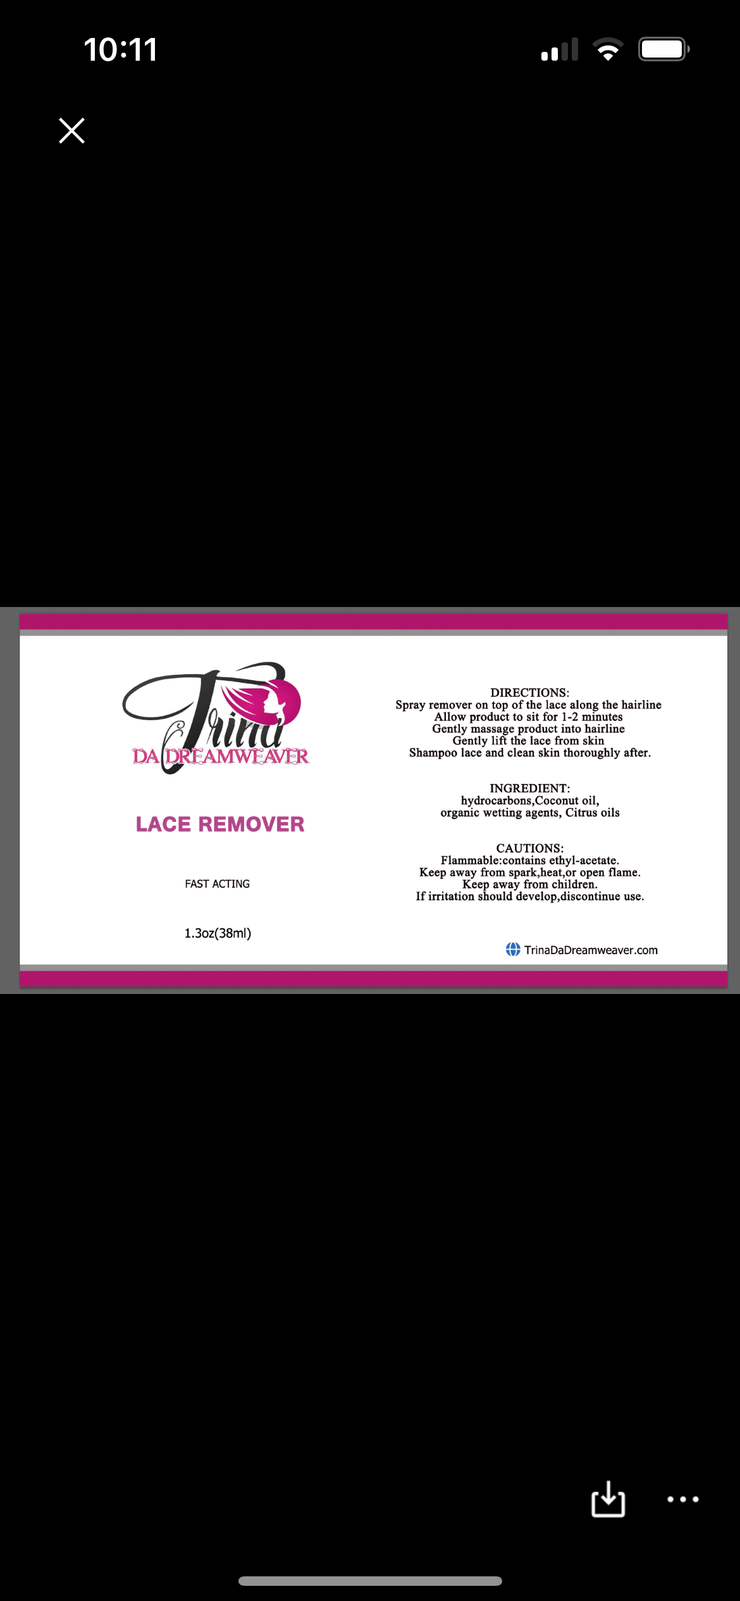 Lace remover fast acting